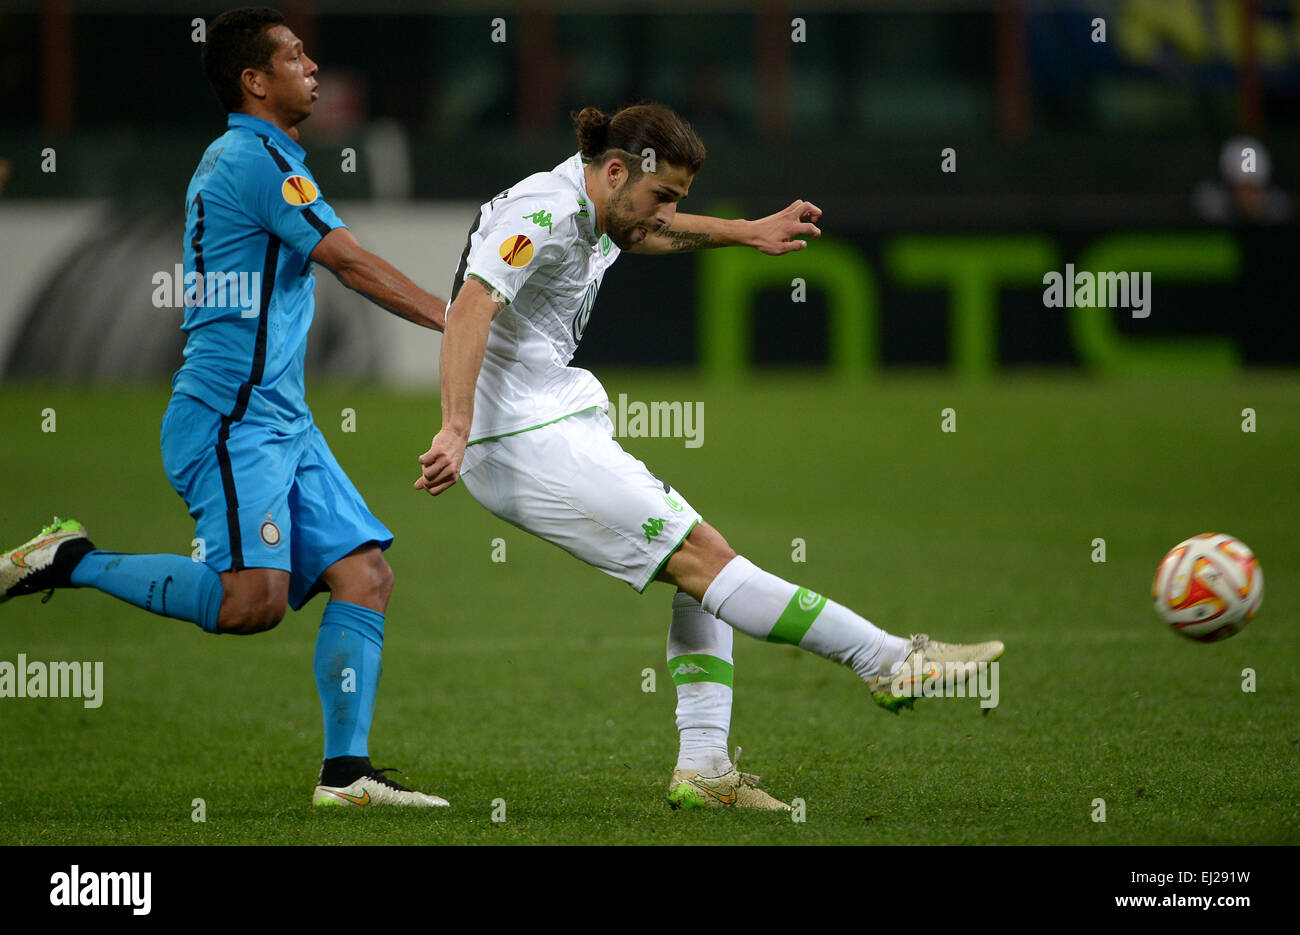 Milan, Italy. 19th Mar, 2015. Wolfsburg's Ricardo Rodriguez (R) and Inter's Fredy Guarín vie for the ball during the UEFA Europa League round of 16 second leg soccer match between Inter Milan and VfL Wolfsburg at Giuseppe Meazza stadium in Milan, Italy, 19 March 2015. Photo: Peter Steffen/dpa/Alamy Live News Stock Photo